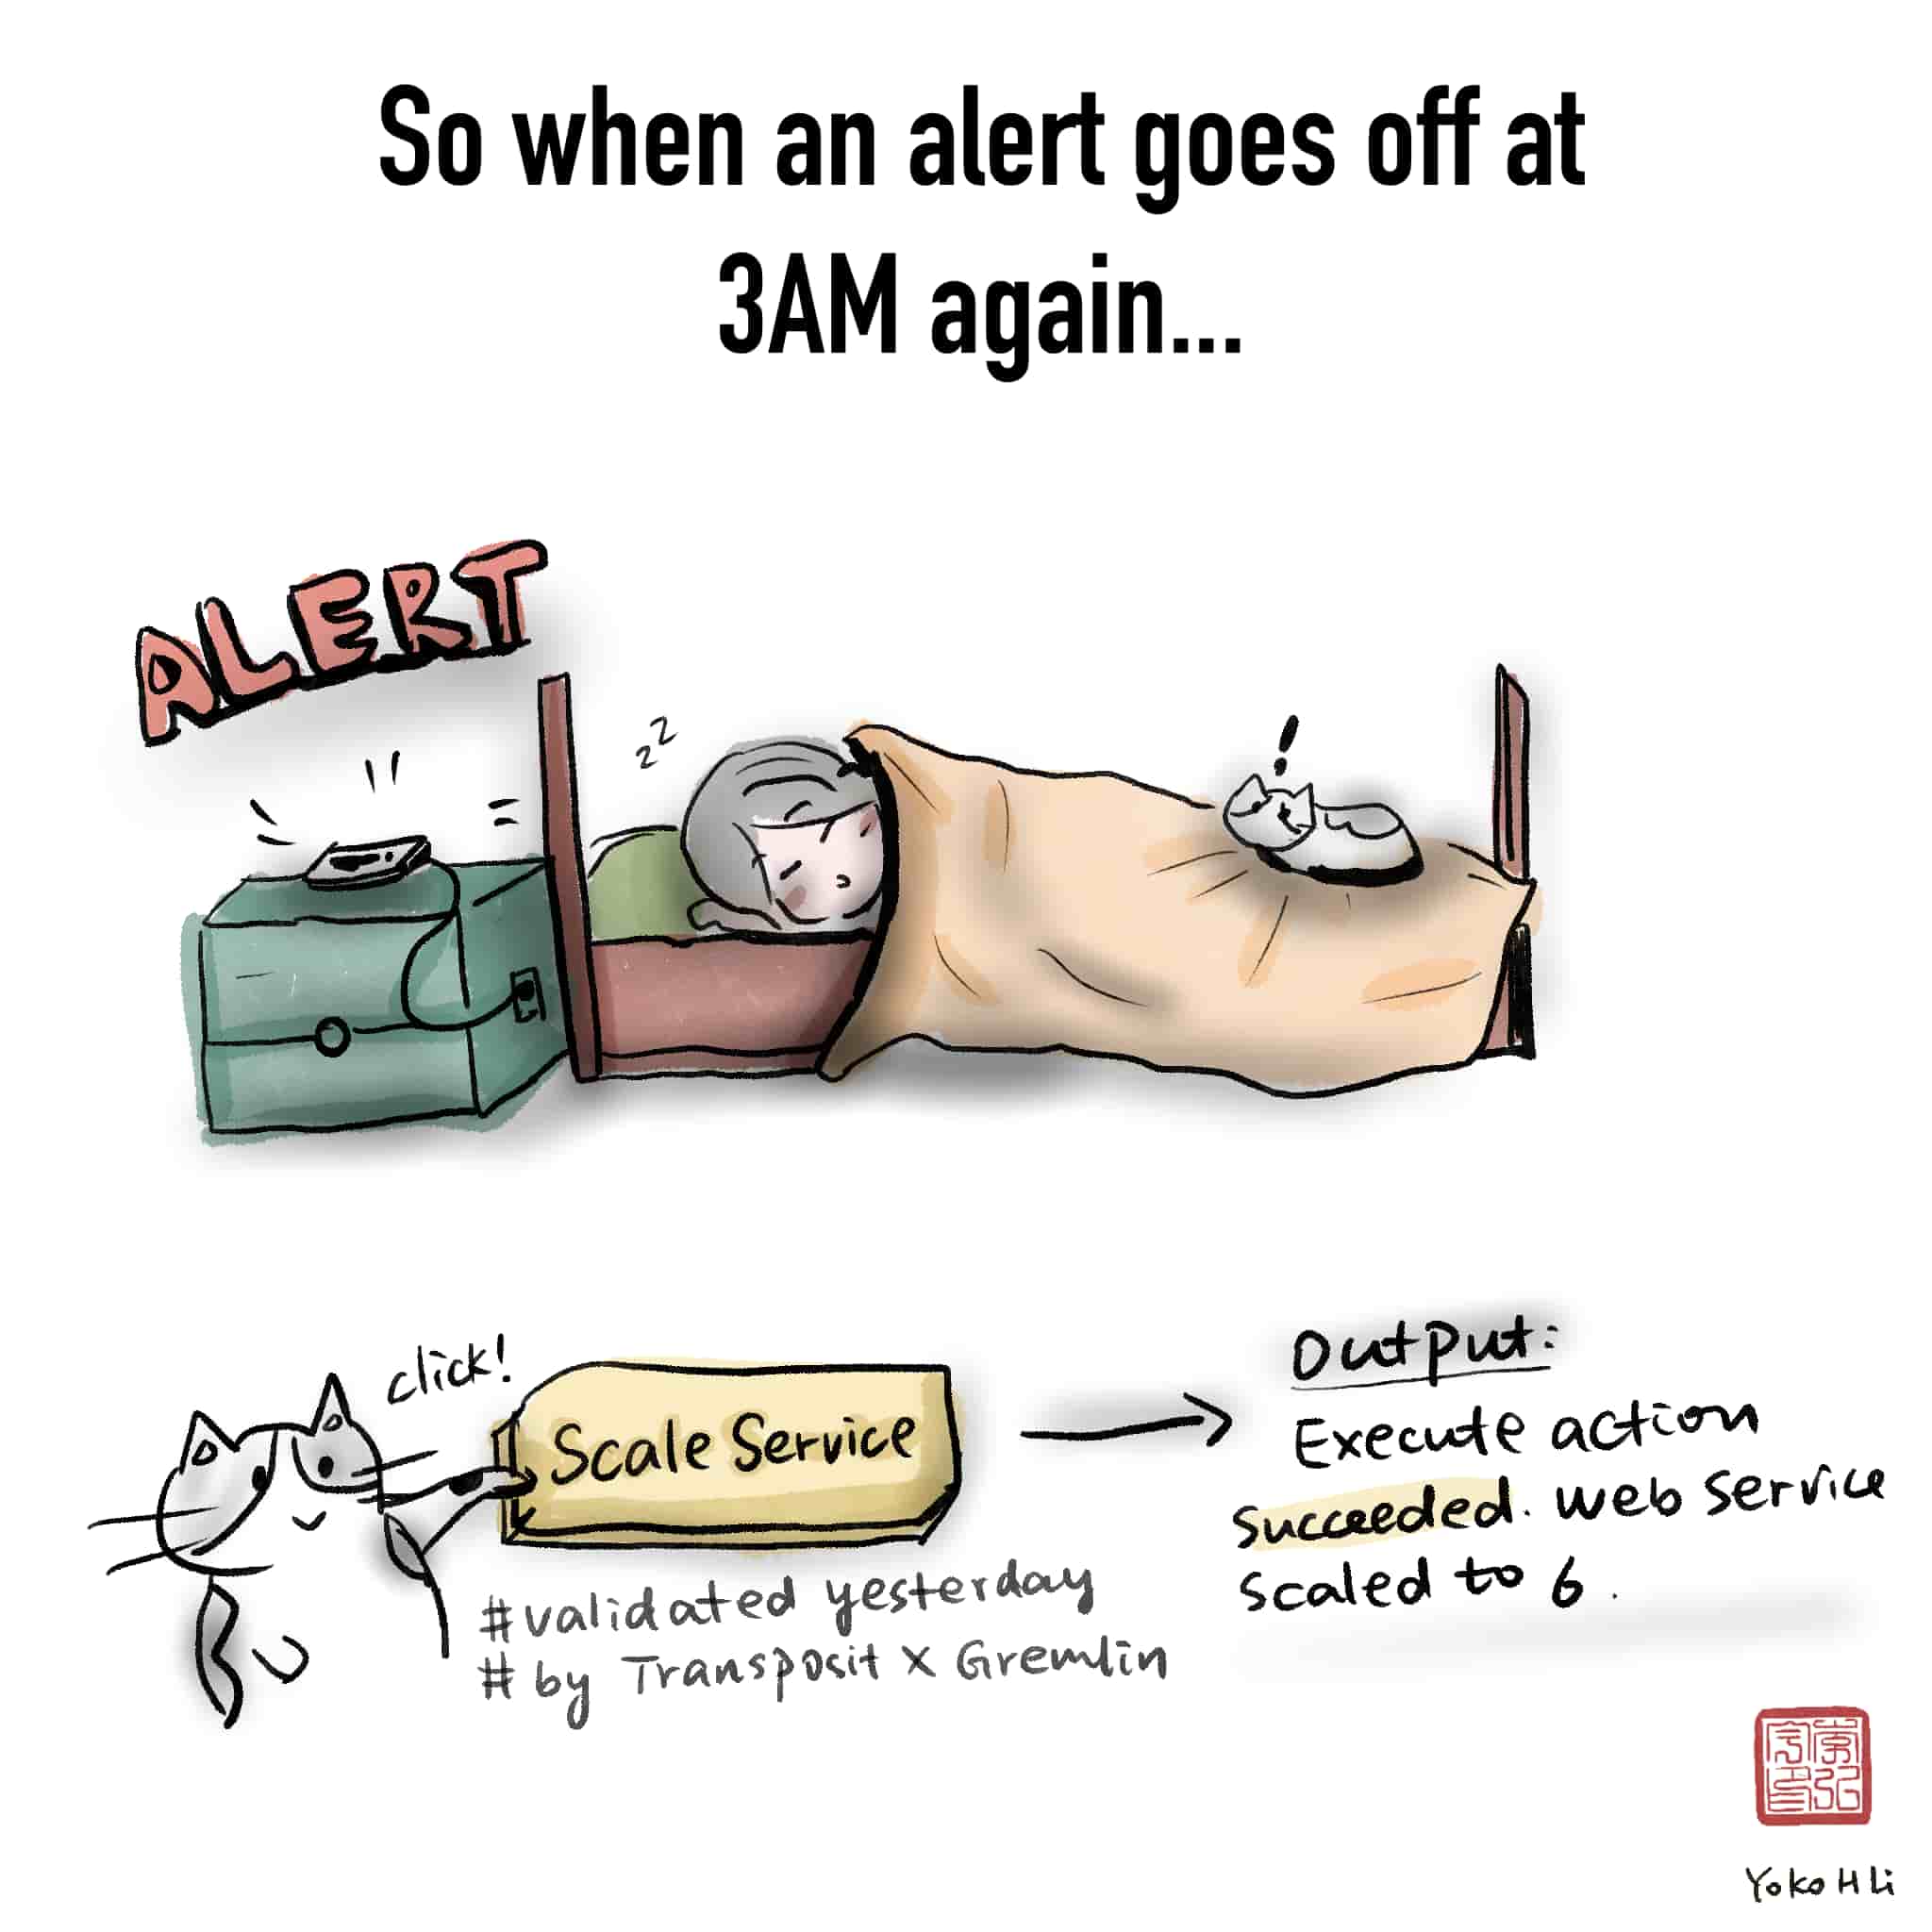 Comic: So when an alert goes off at 3AM again... Image: Cat following validated runbook to scale service